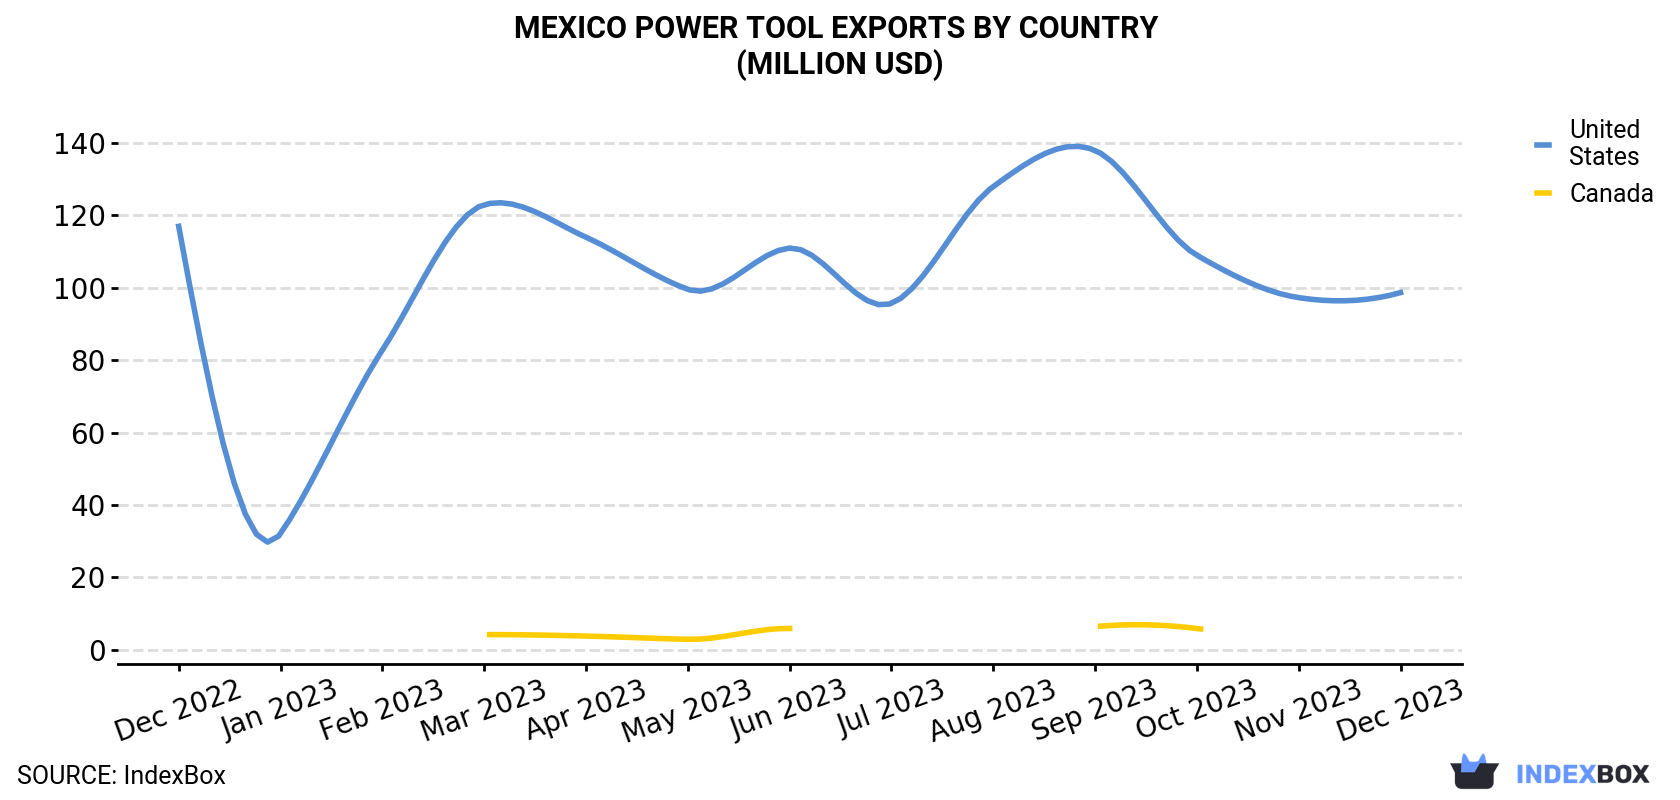 Mexico Power Tool Exports By Country (Million USD)